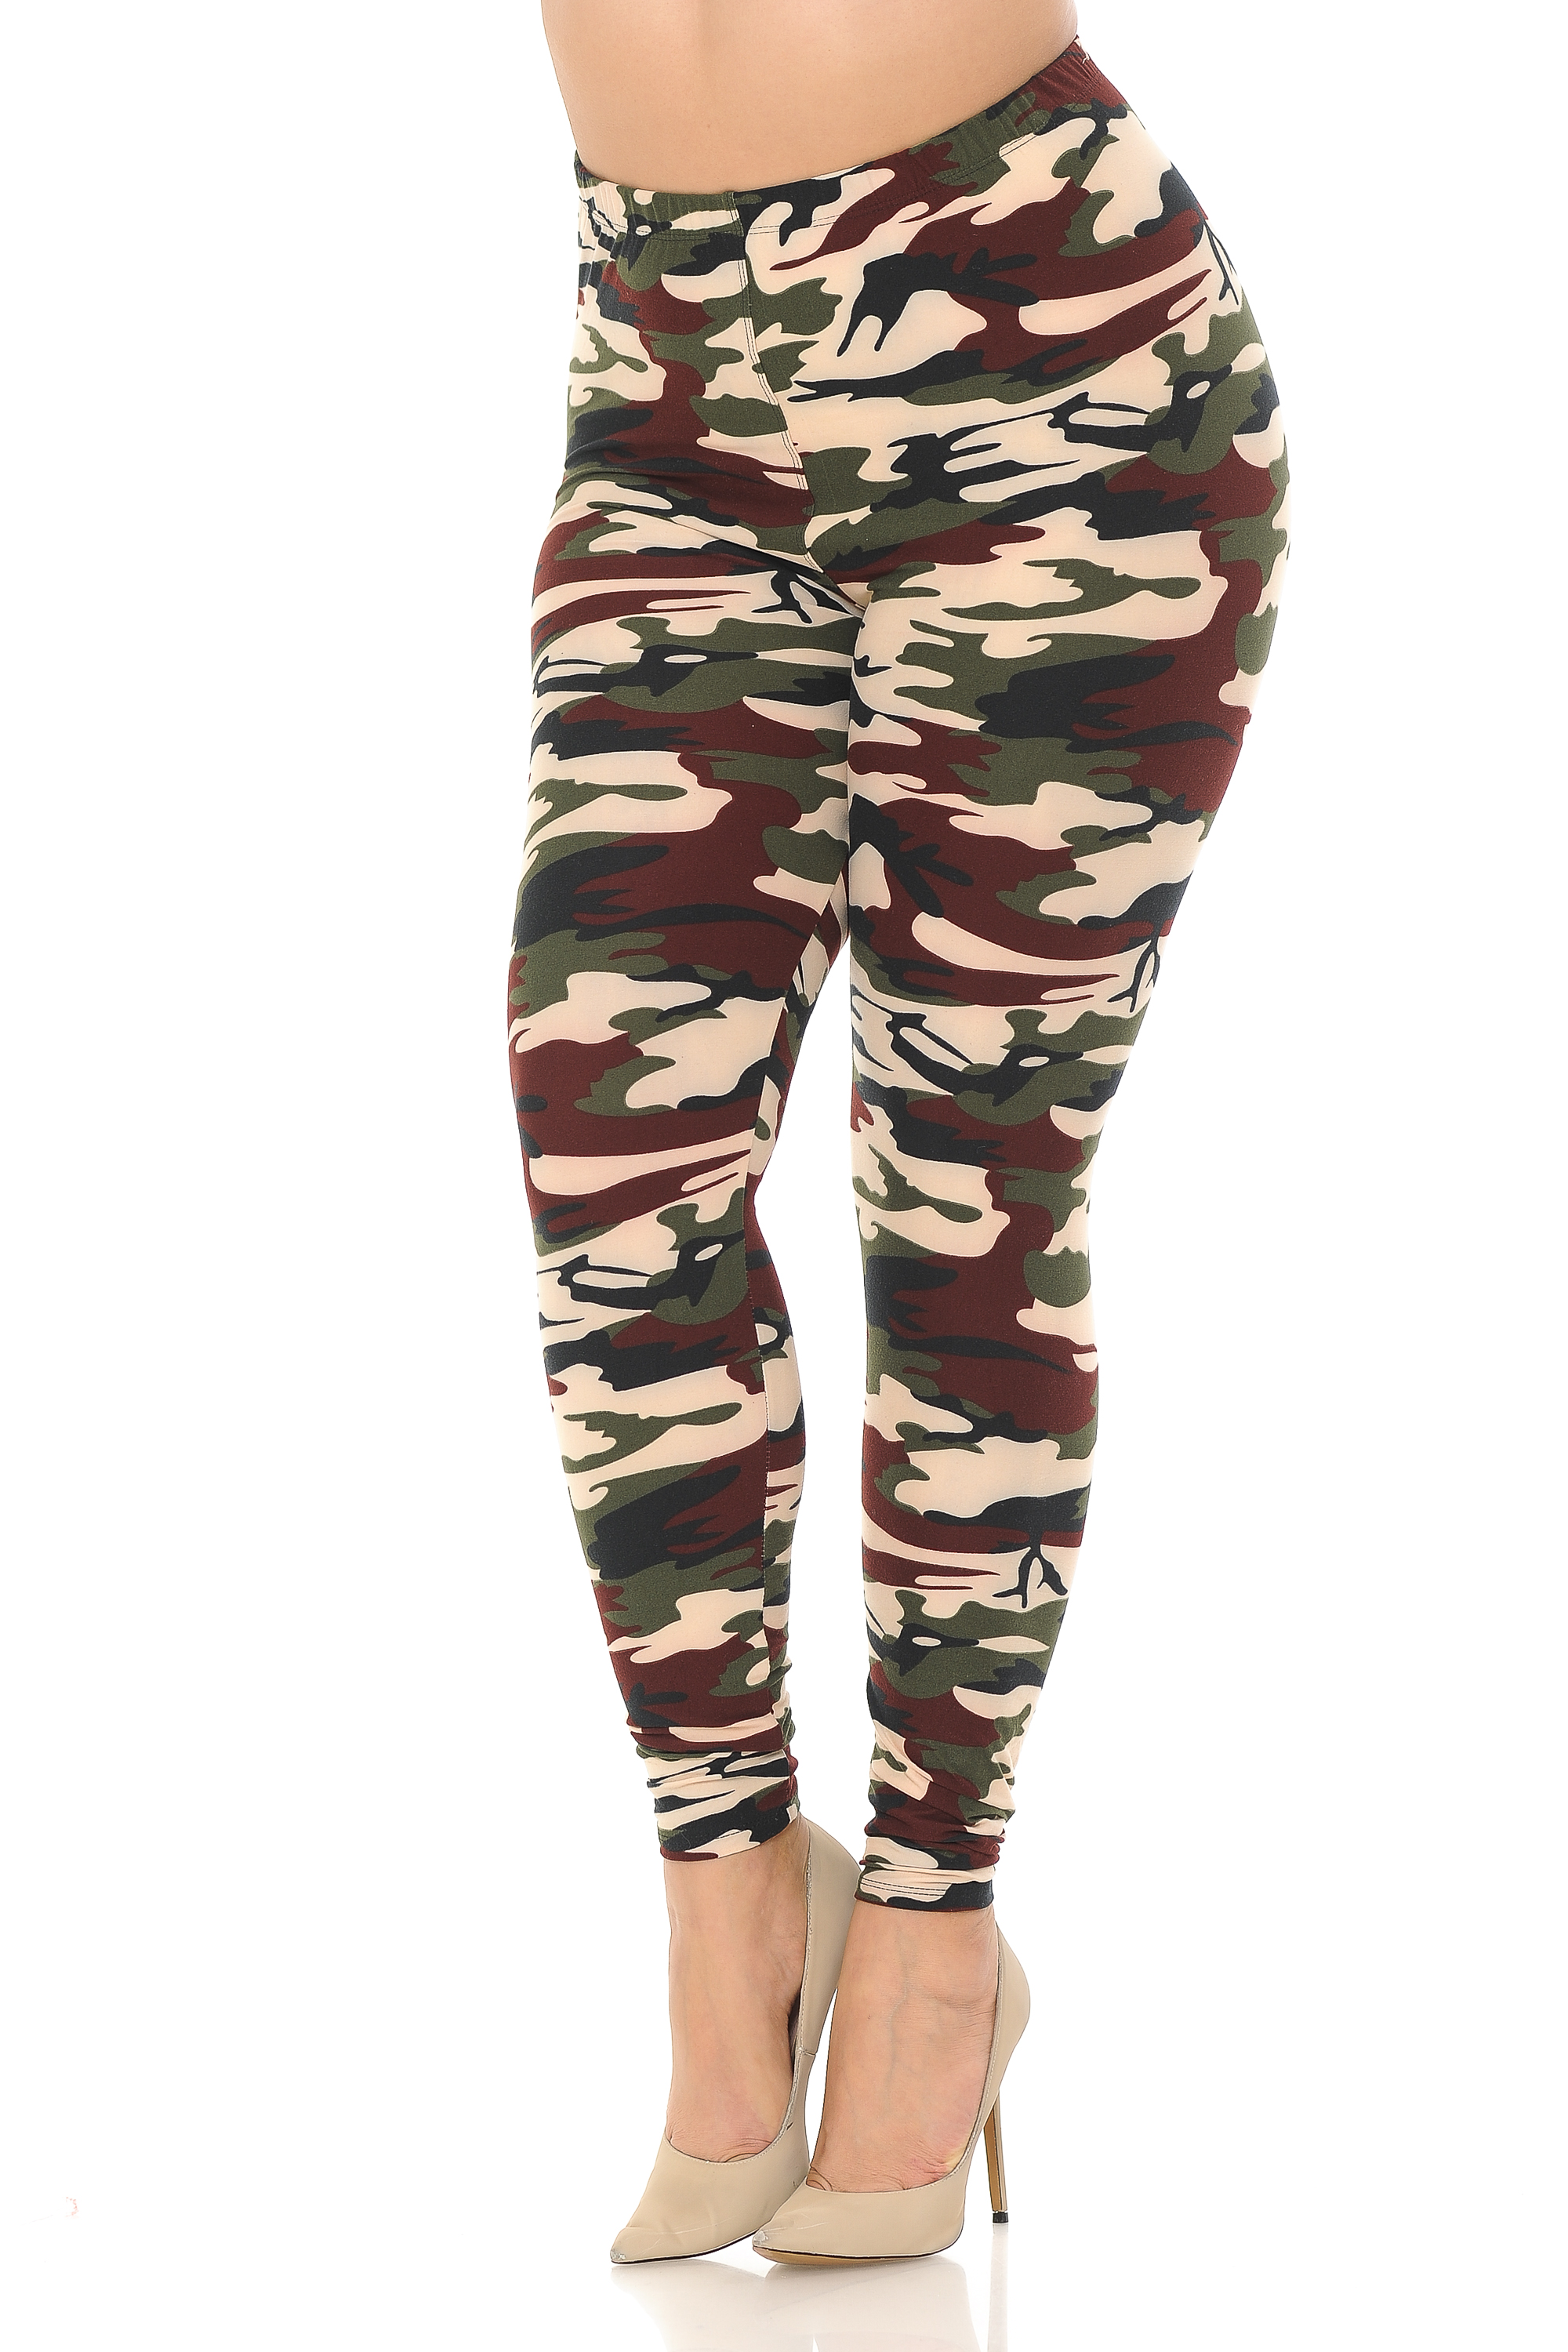 Wholesale Buttery Smooth Cozy Camouflage Plus Size Leggings